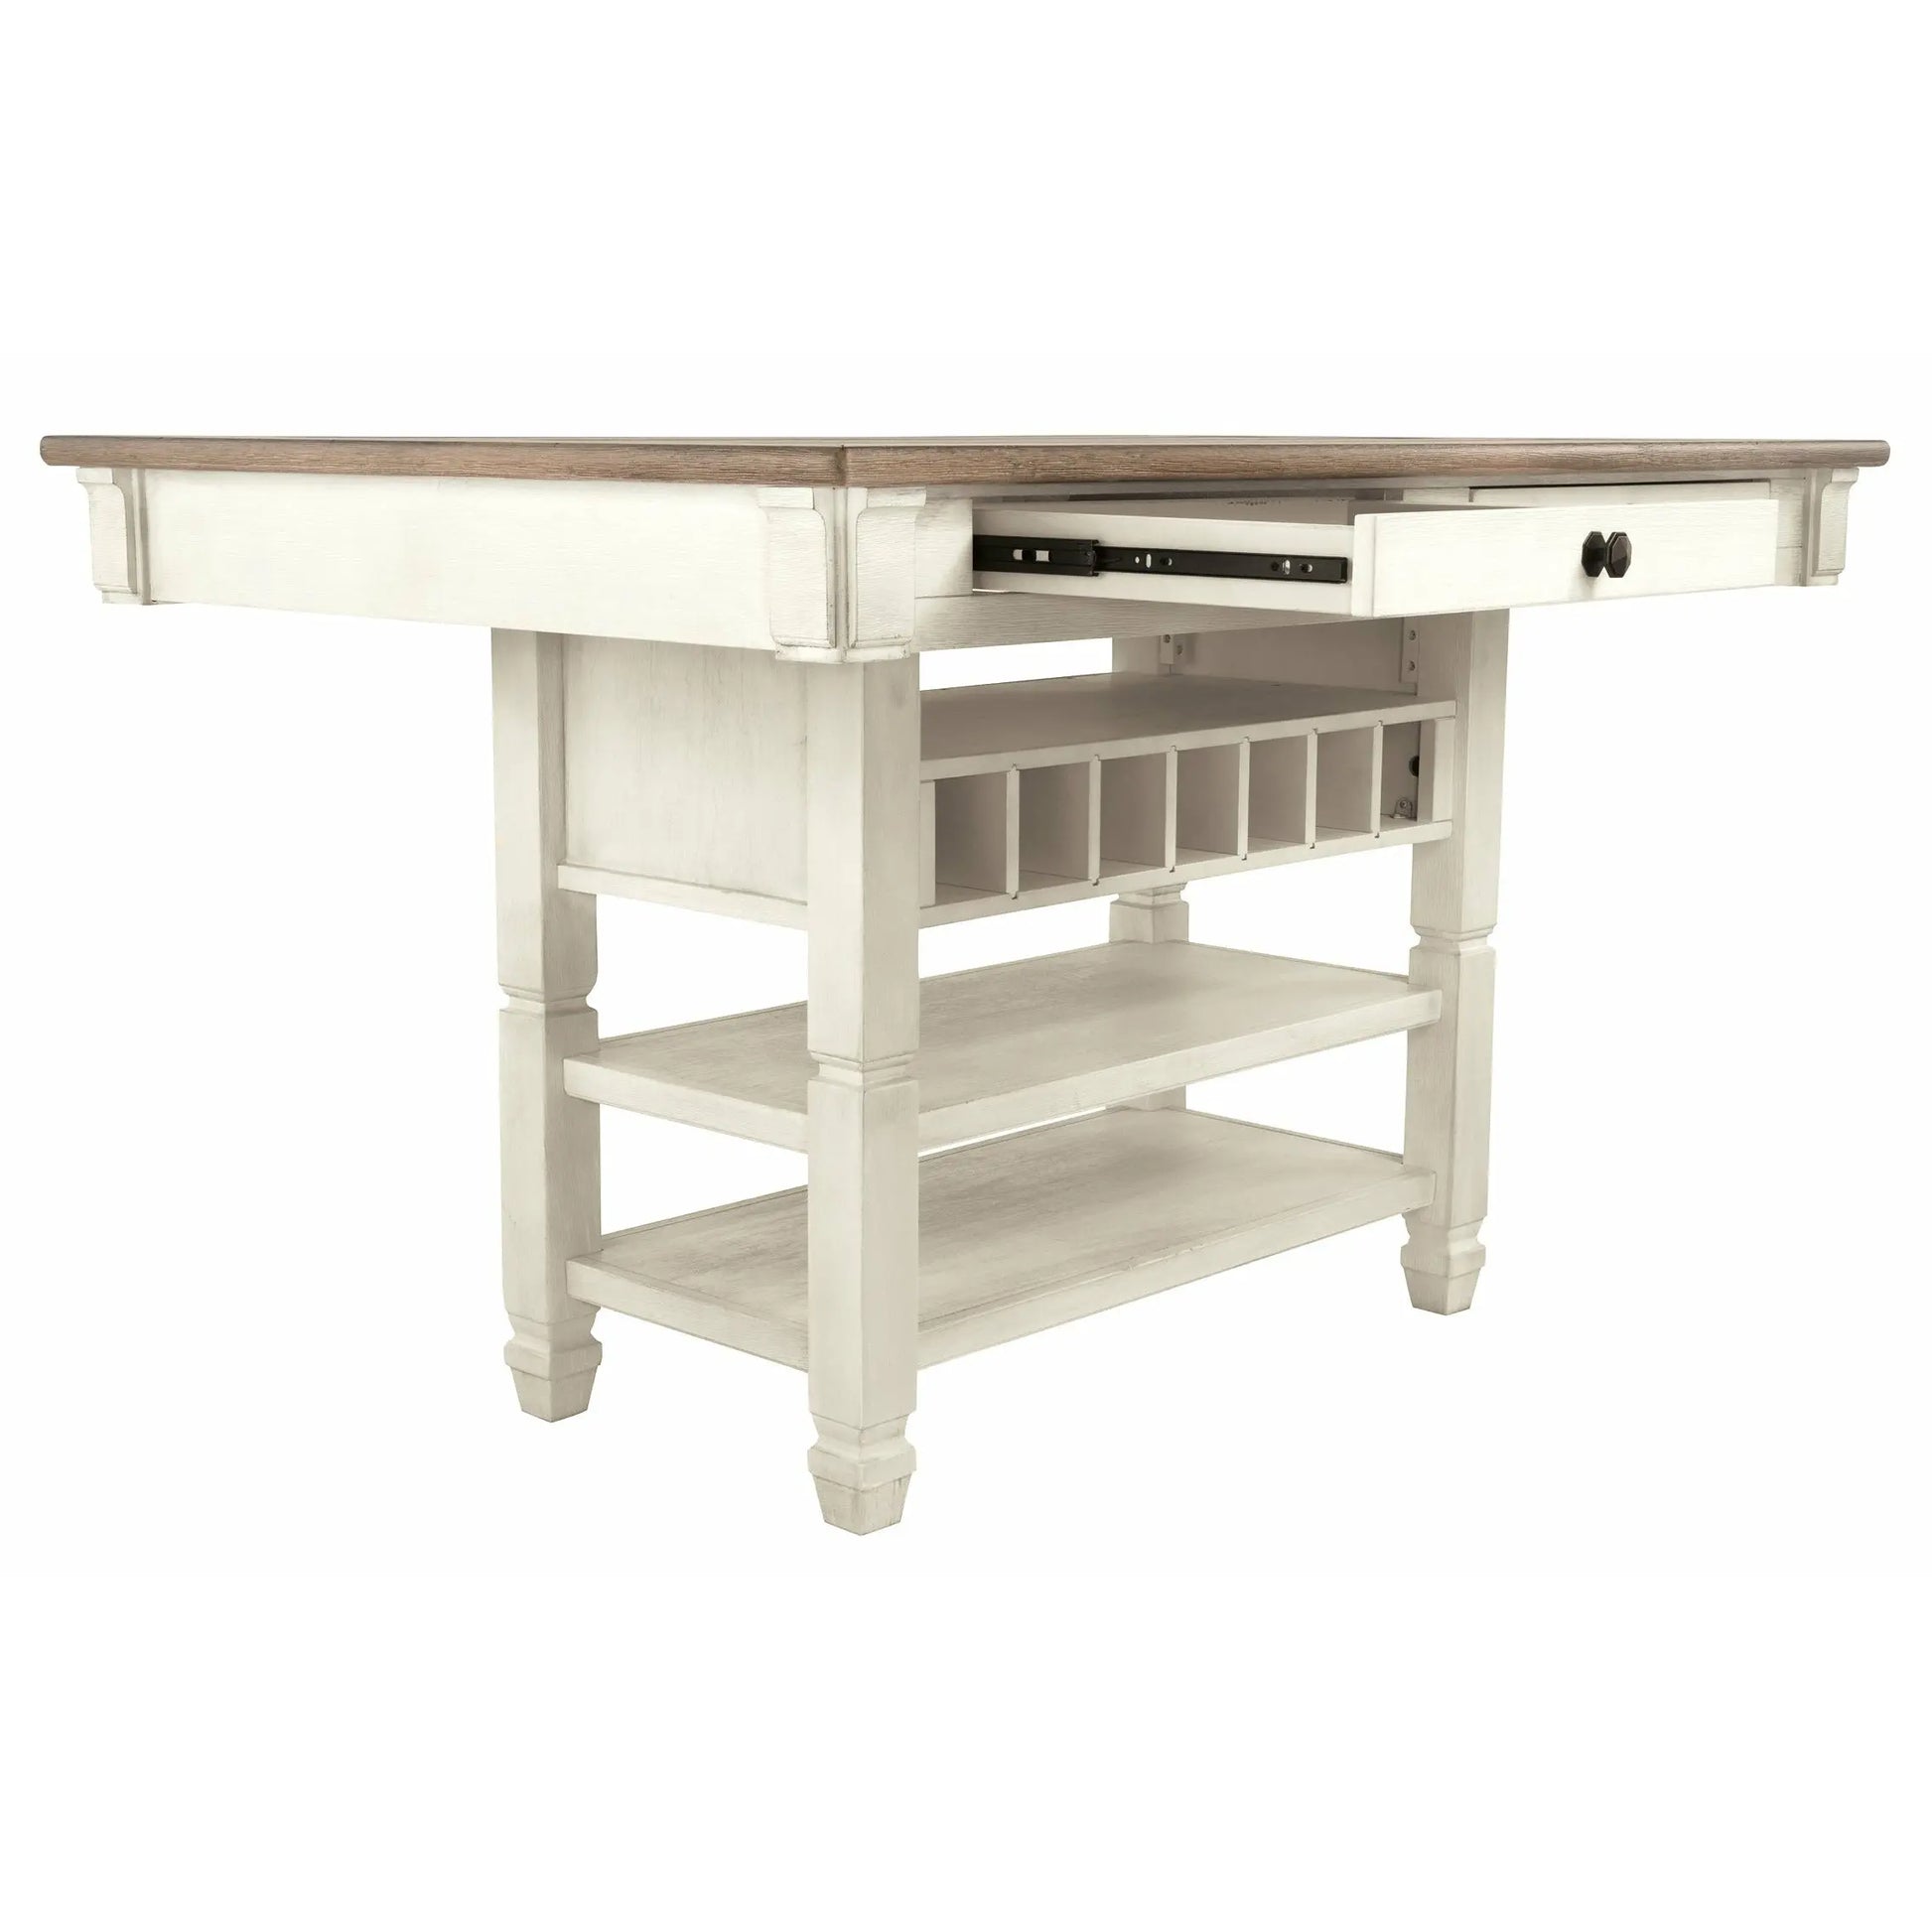 Bolanburg RECT Dining Room Counter Table DINING TABLE